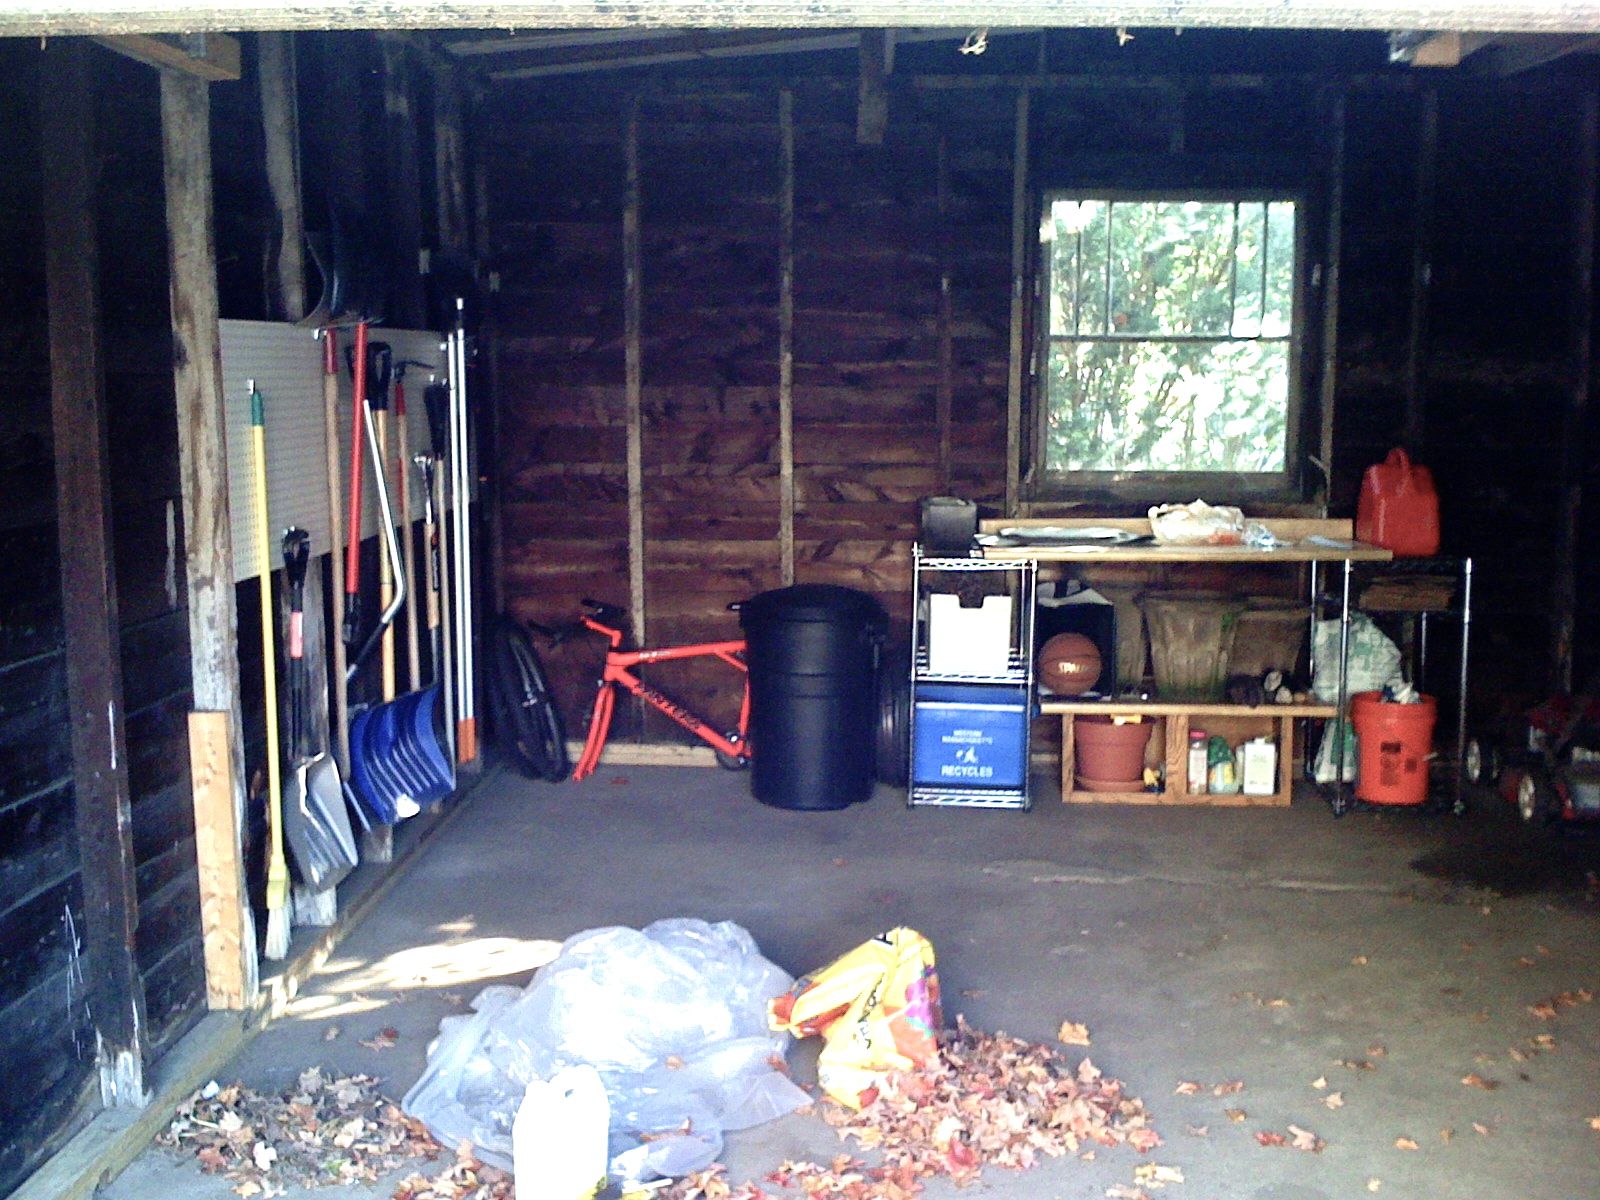 BLAST FROM THE PAST: The garage, circa 2007. This was how it looked after our first major clean-up. We had a station for potting plants, housing recycling, and yard tools. That's all gone now so that we can keep our lawnmower and snowblower in the garage with the car, and still have space for all the other goodies we've accumulated.